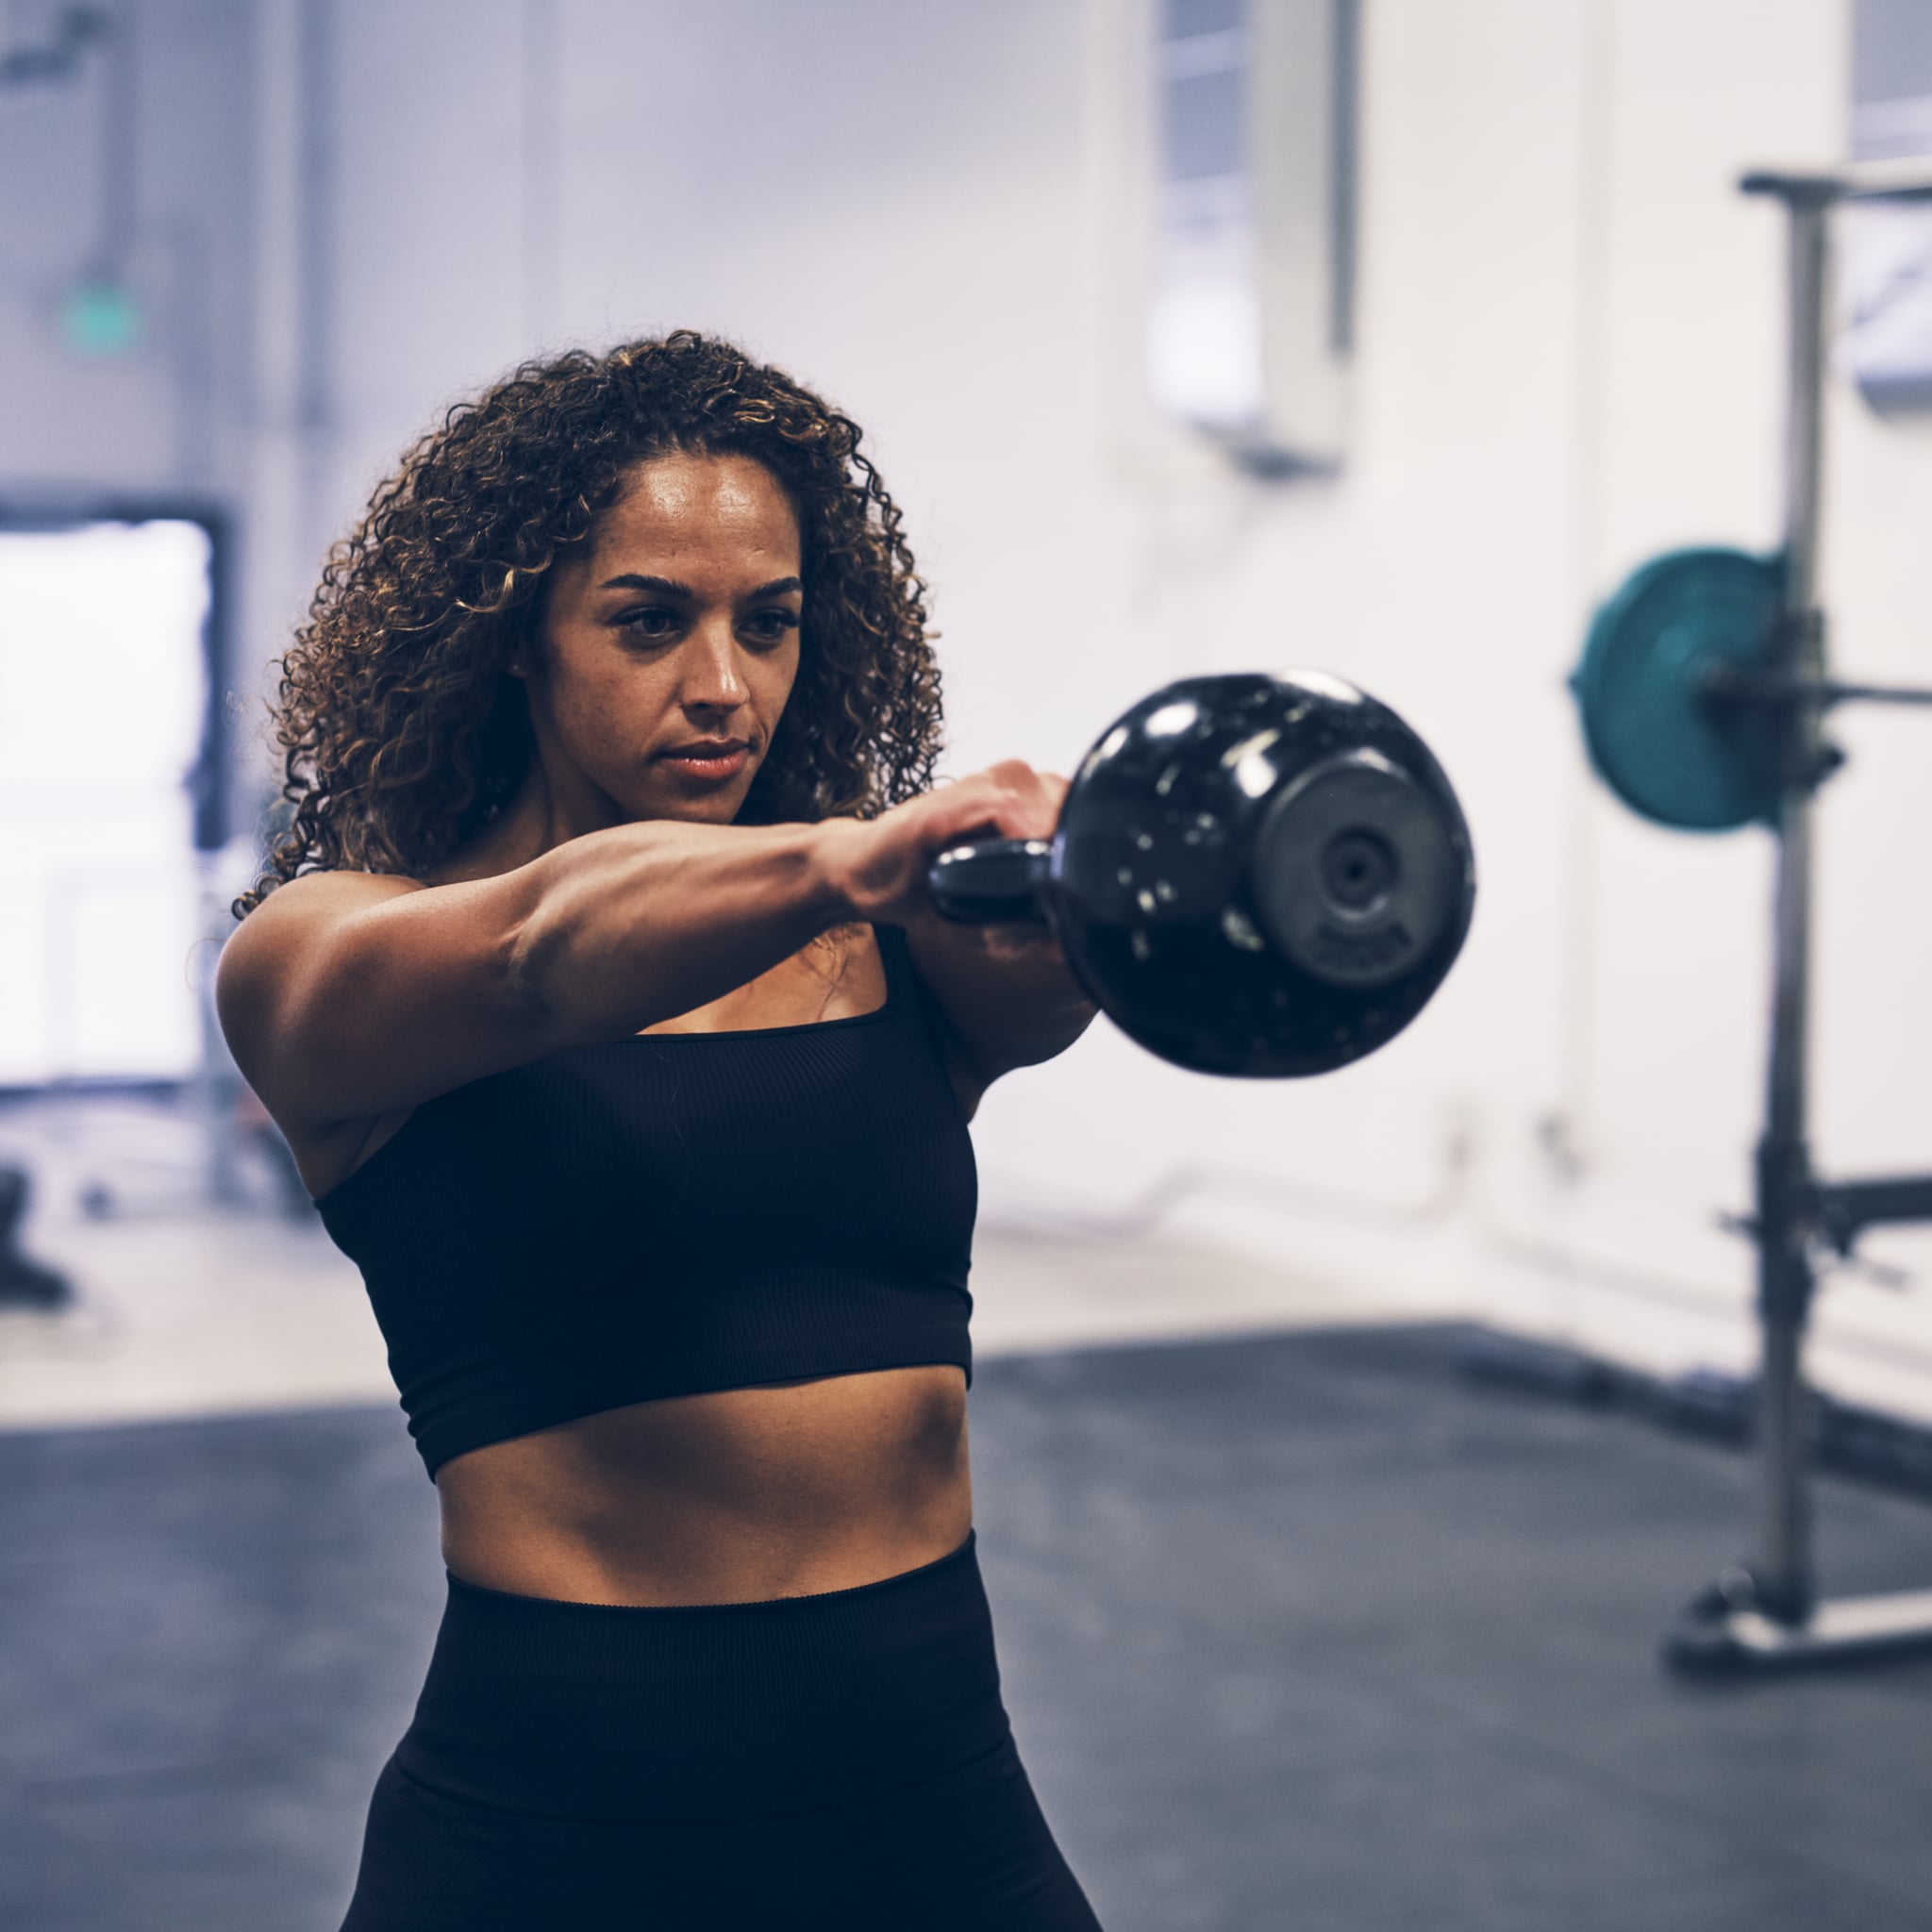 <p>If you're ready to take your strength workouts to the next level and shock your muscles (in a good way of course), CrossFit might be exactly what you need. This training style is quick, intense, and no matter the workout, you're going to be gassed once it's over. </p> <p>One of the biggest perks of CrossFit is the fitness community you get from joining a gym (aka a box). But if you're wary of signing up (or maybe just wondering <a href="https://www.popsugar.com/fitness/What-CrossFit-43683971" class="ga-track">what CrossFit is like</a>), you might want to check out some CrossFit workouts - or even try a few on your own - before committing. </p> <p>To help you get a taste, we rounded up our favorite CrossFit workouts. They range from 10 minutes to 60 minutes, and all require different equipment, so you can find one that fits your current needs. (We also listed them from shortest to longest, so you can easily find what you want.) No matter which you choose, it's sure to help improve your strength, both mentally and physically. Whether you're just dipping your toe into CrossFit or you're well-acquainted and looking to do a WOD ("workout of the day") on your own, give any of these CrossFit workouts a shot. </p>